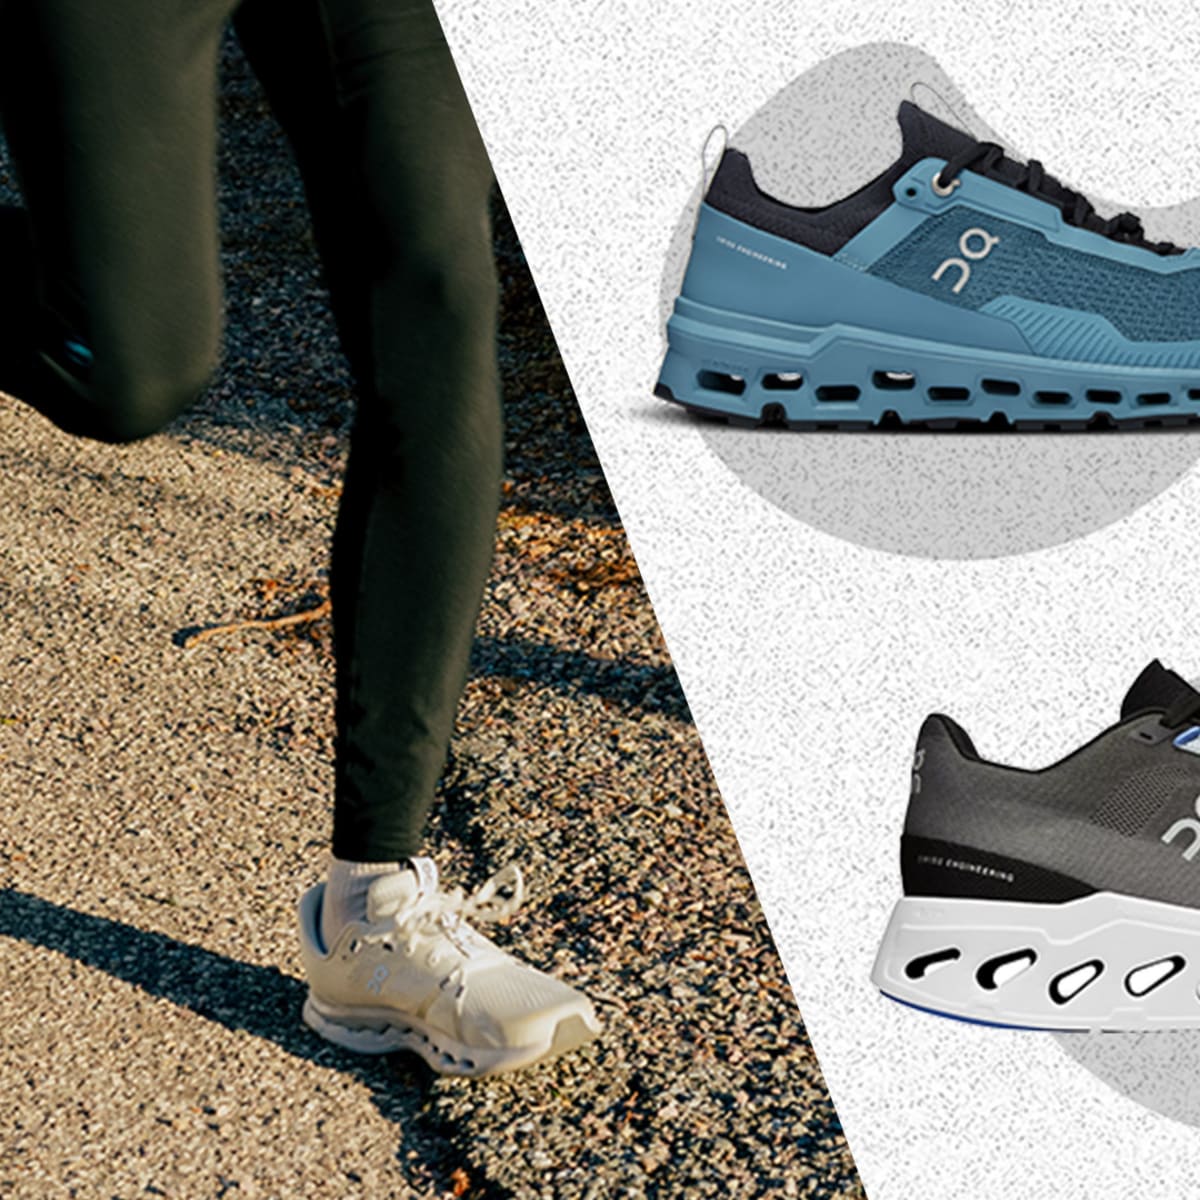 What the Tech? How On's CloudTec Cushioning Works